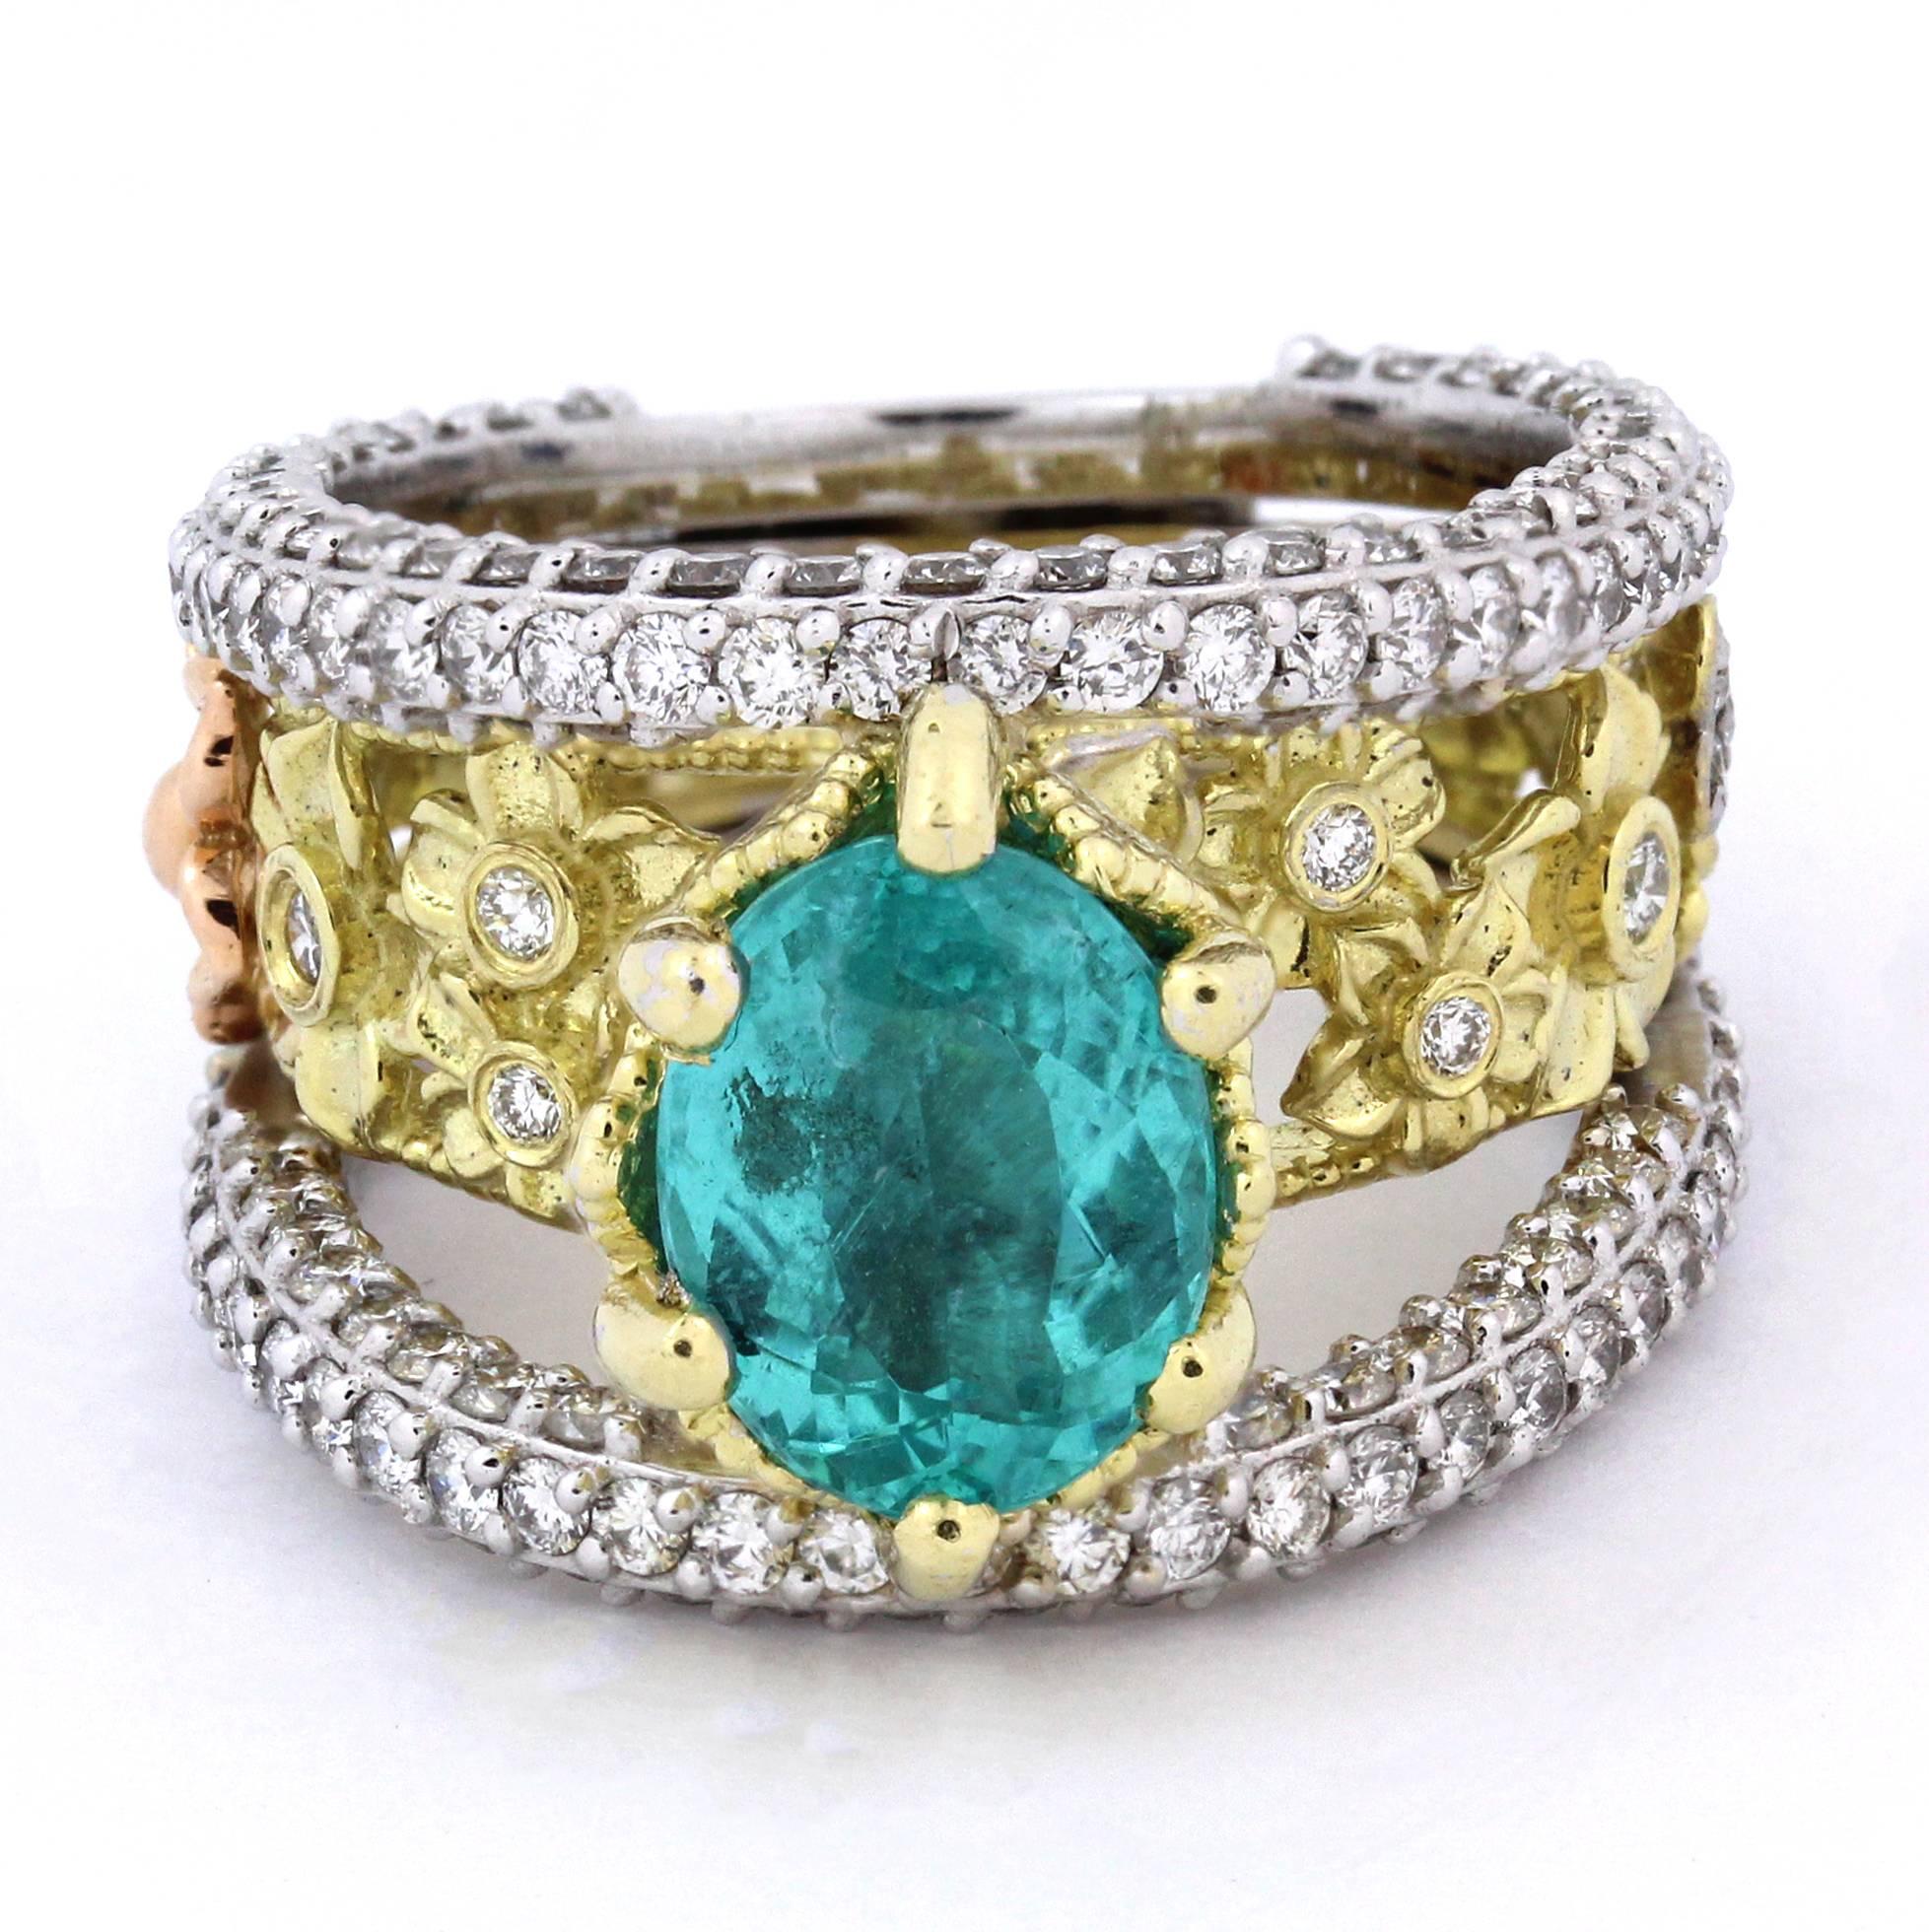 18K Yellow, White and Pink Gold Ring with Paraiba Copper Bearing Tourmaline ring by Stambolian

This is a one of a kind ring with a stunning display of design work and craftsmanship. The ring itself has three sections. One done in yellow gold with